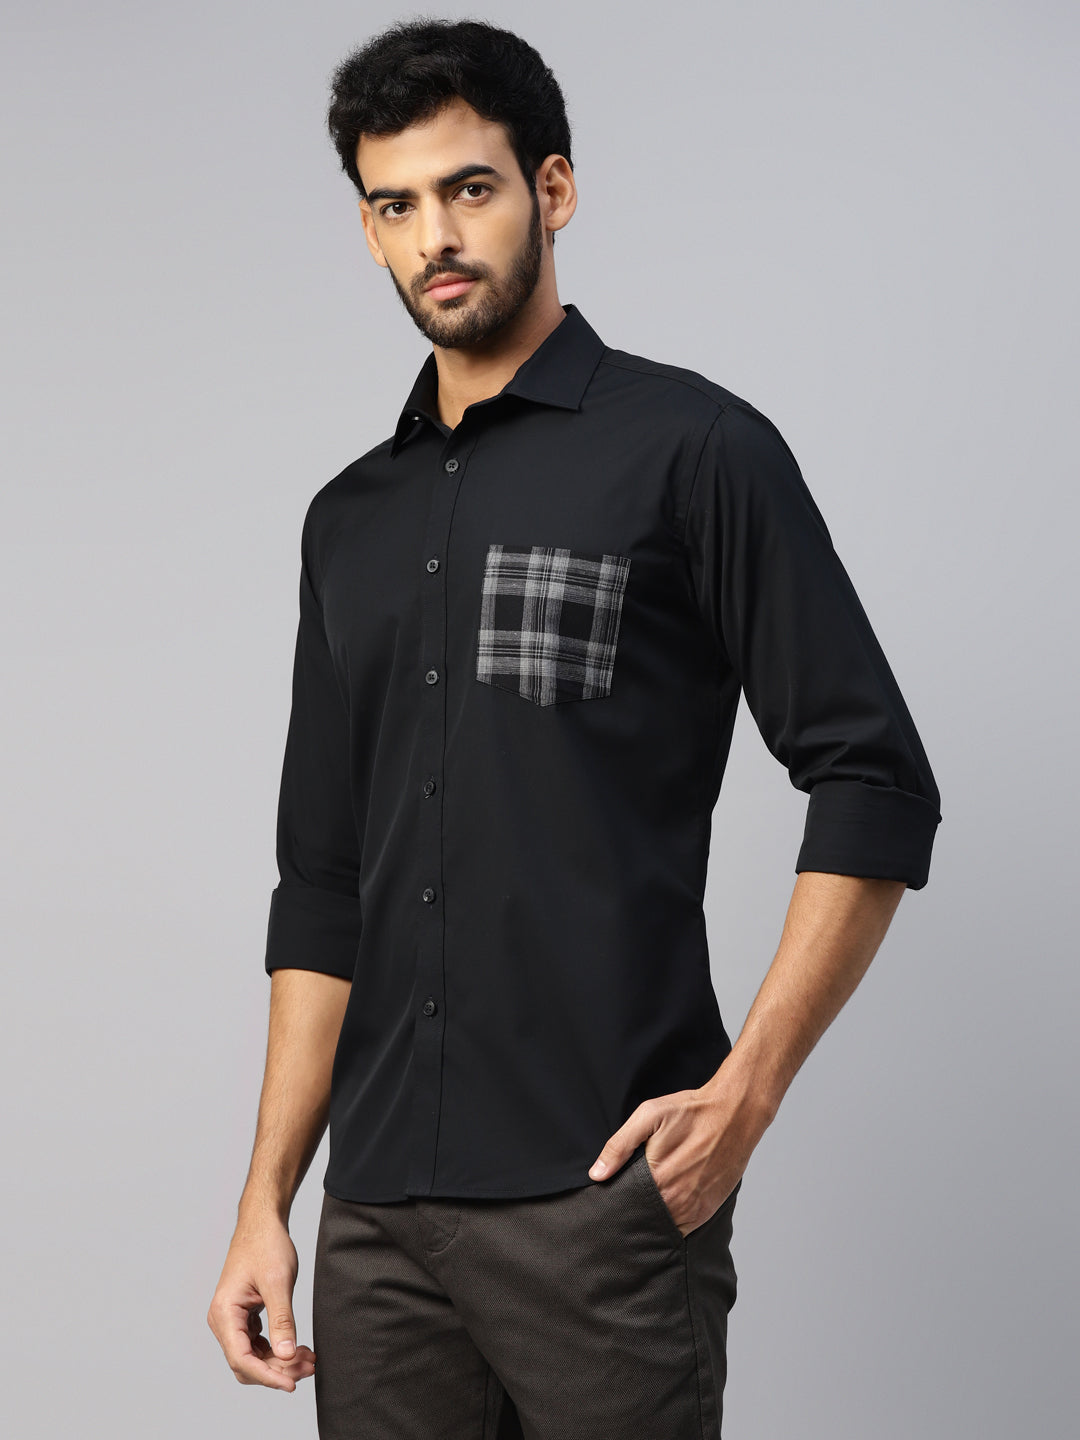 Don Vino Men's Slim Fit Shirt With Contrast Pockets